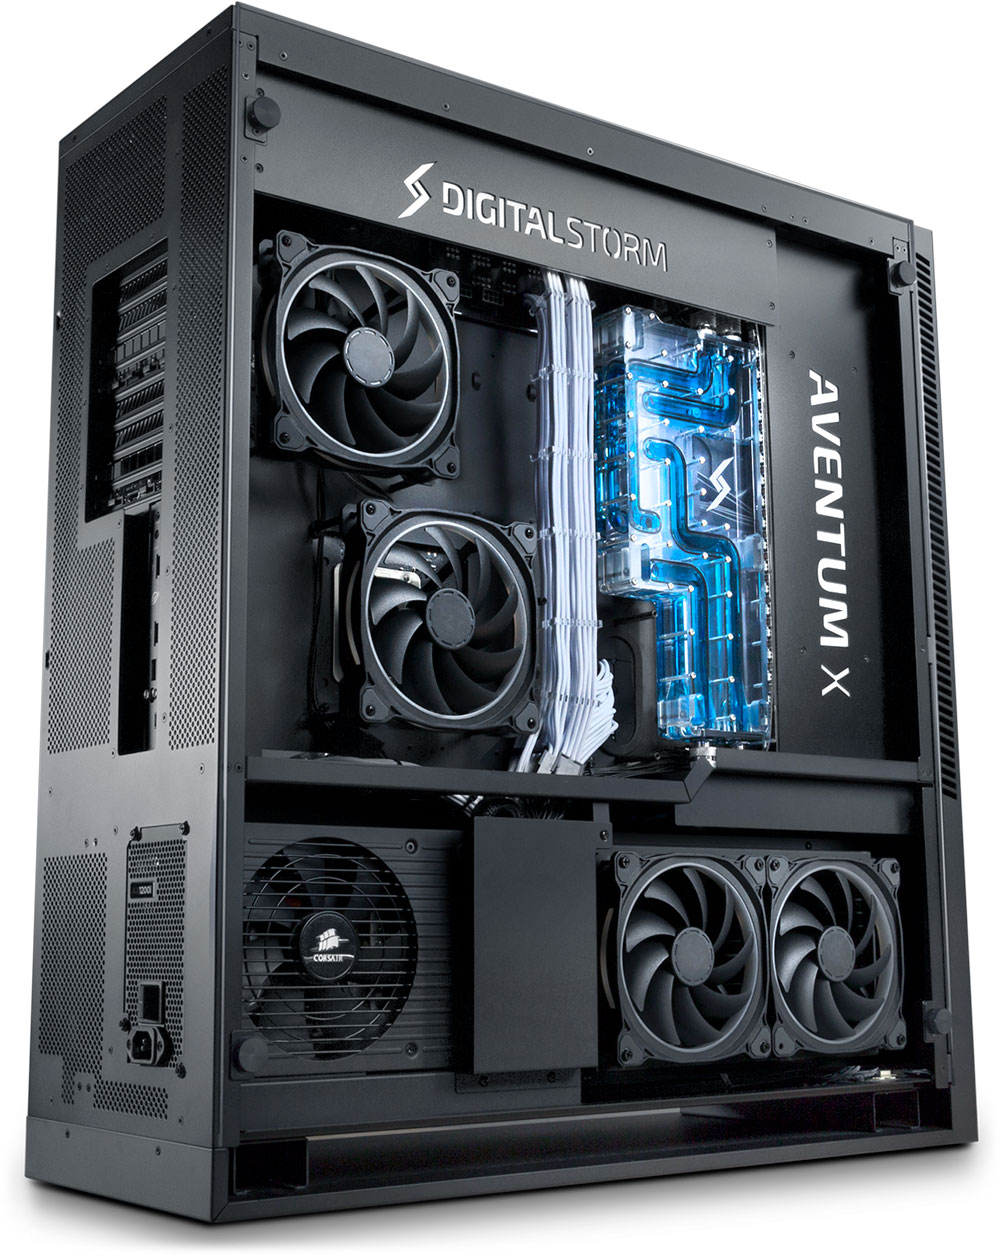 Aventum-X PC image spotting its advanced cooling system